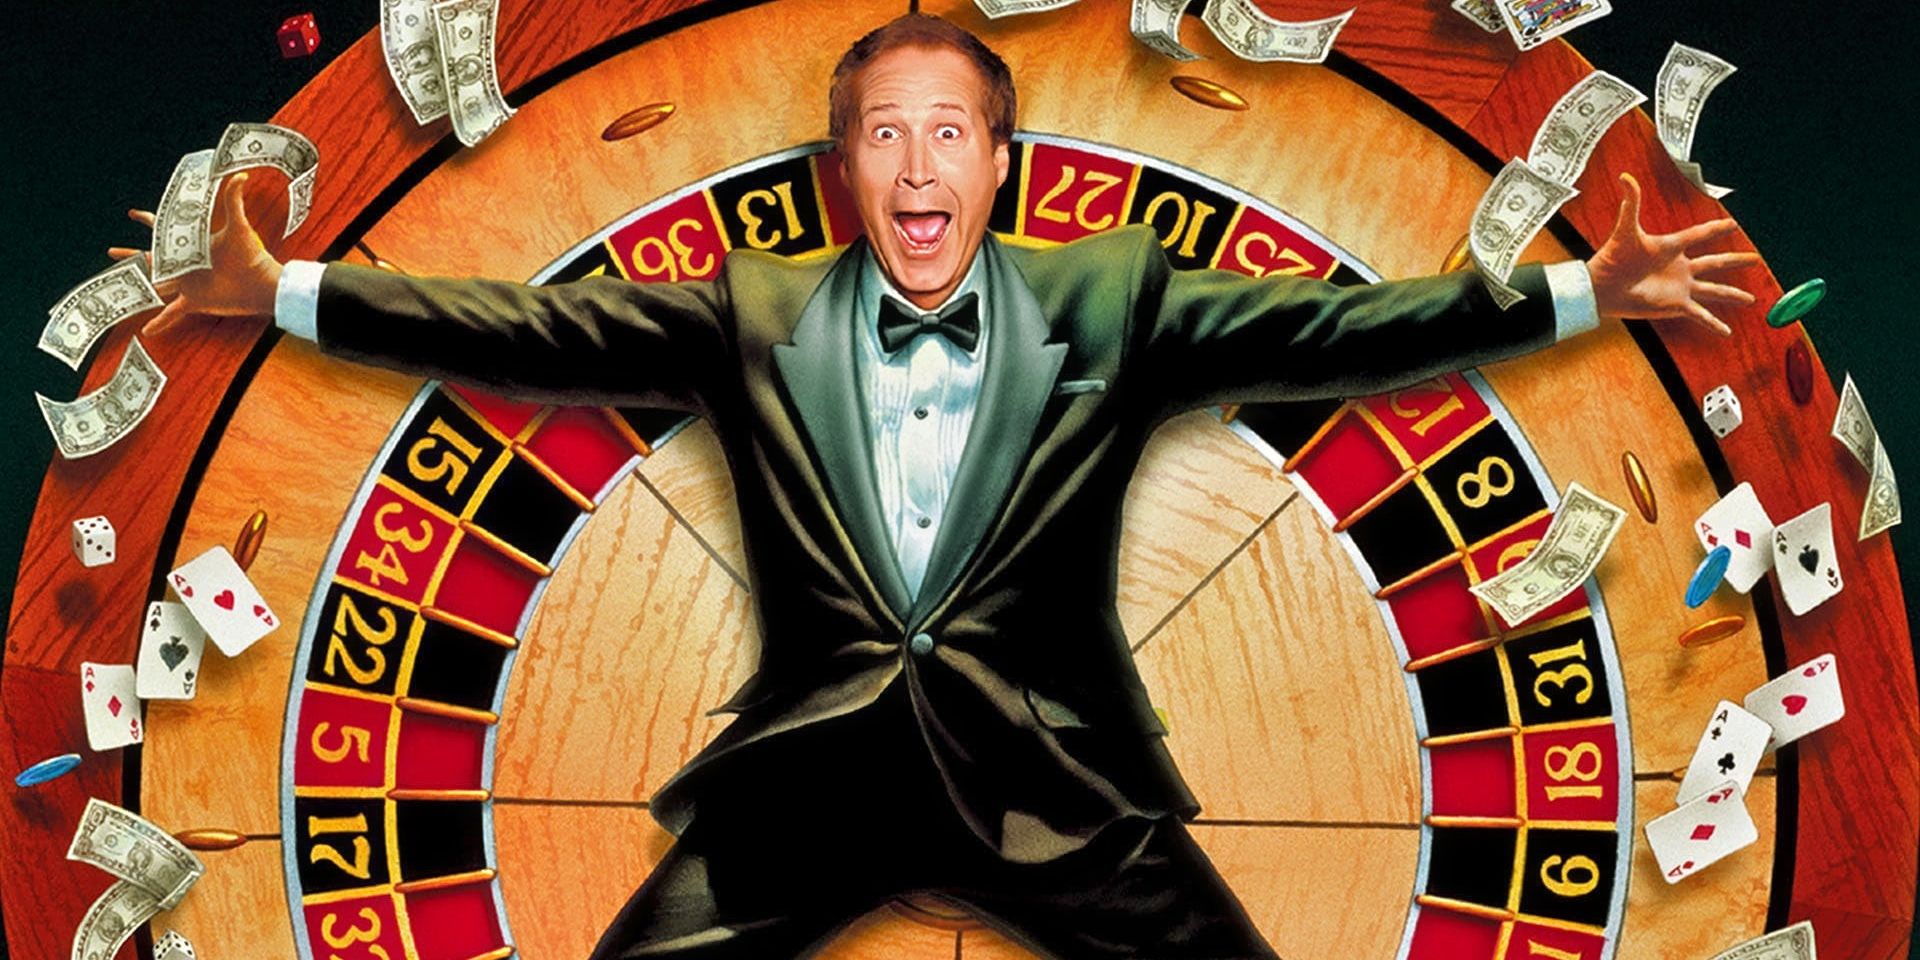 chevy chase in the poster for vegas vacation